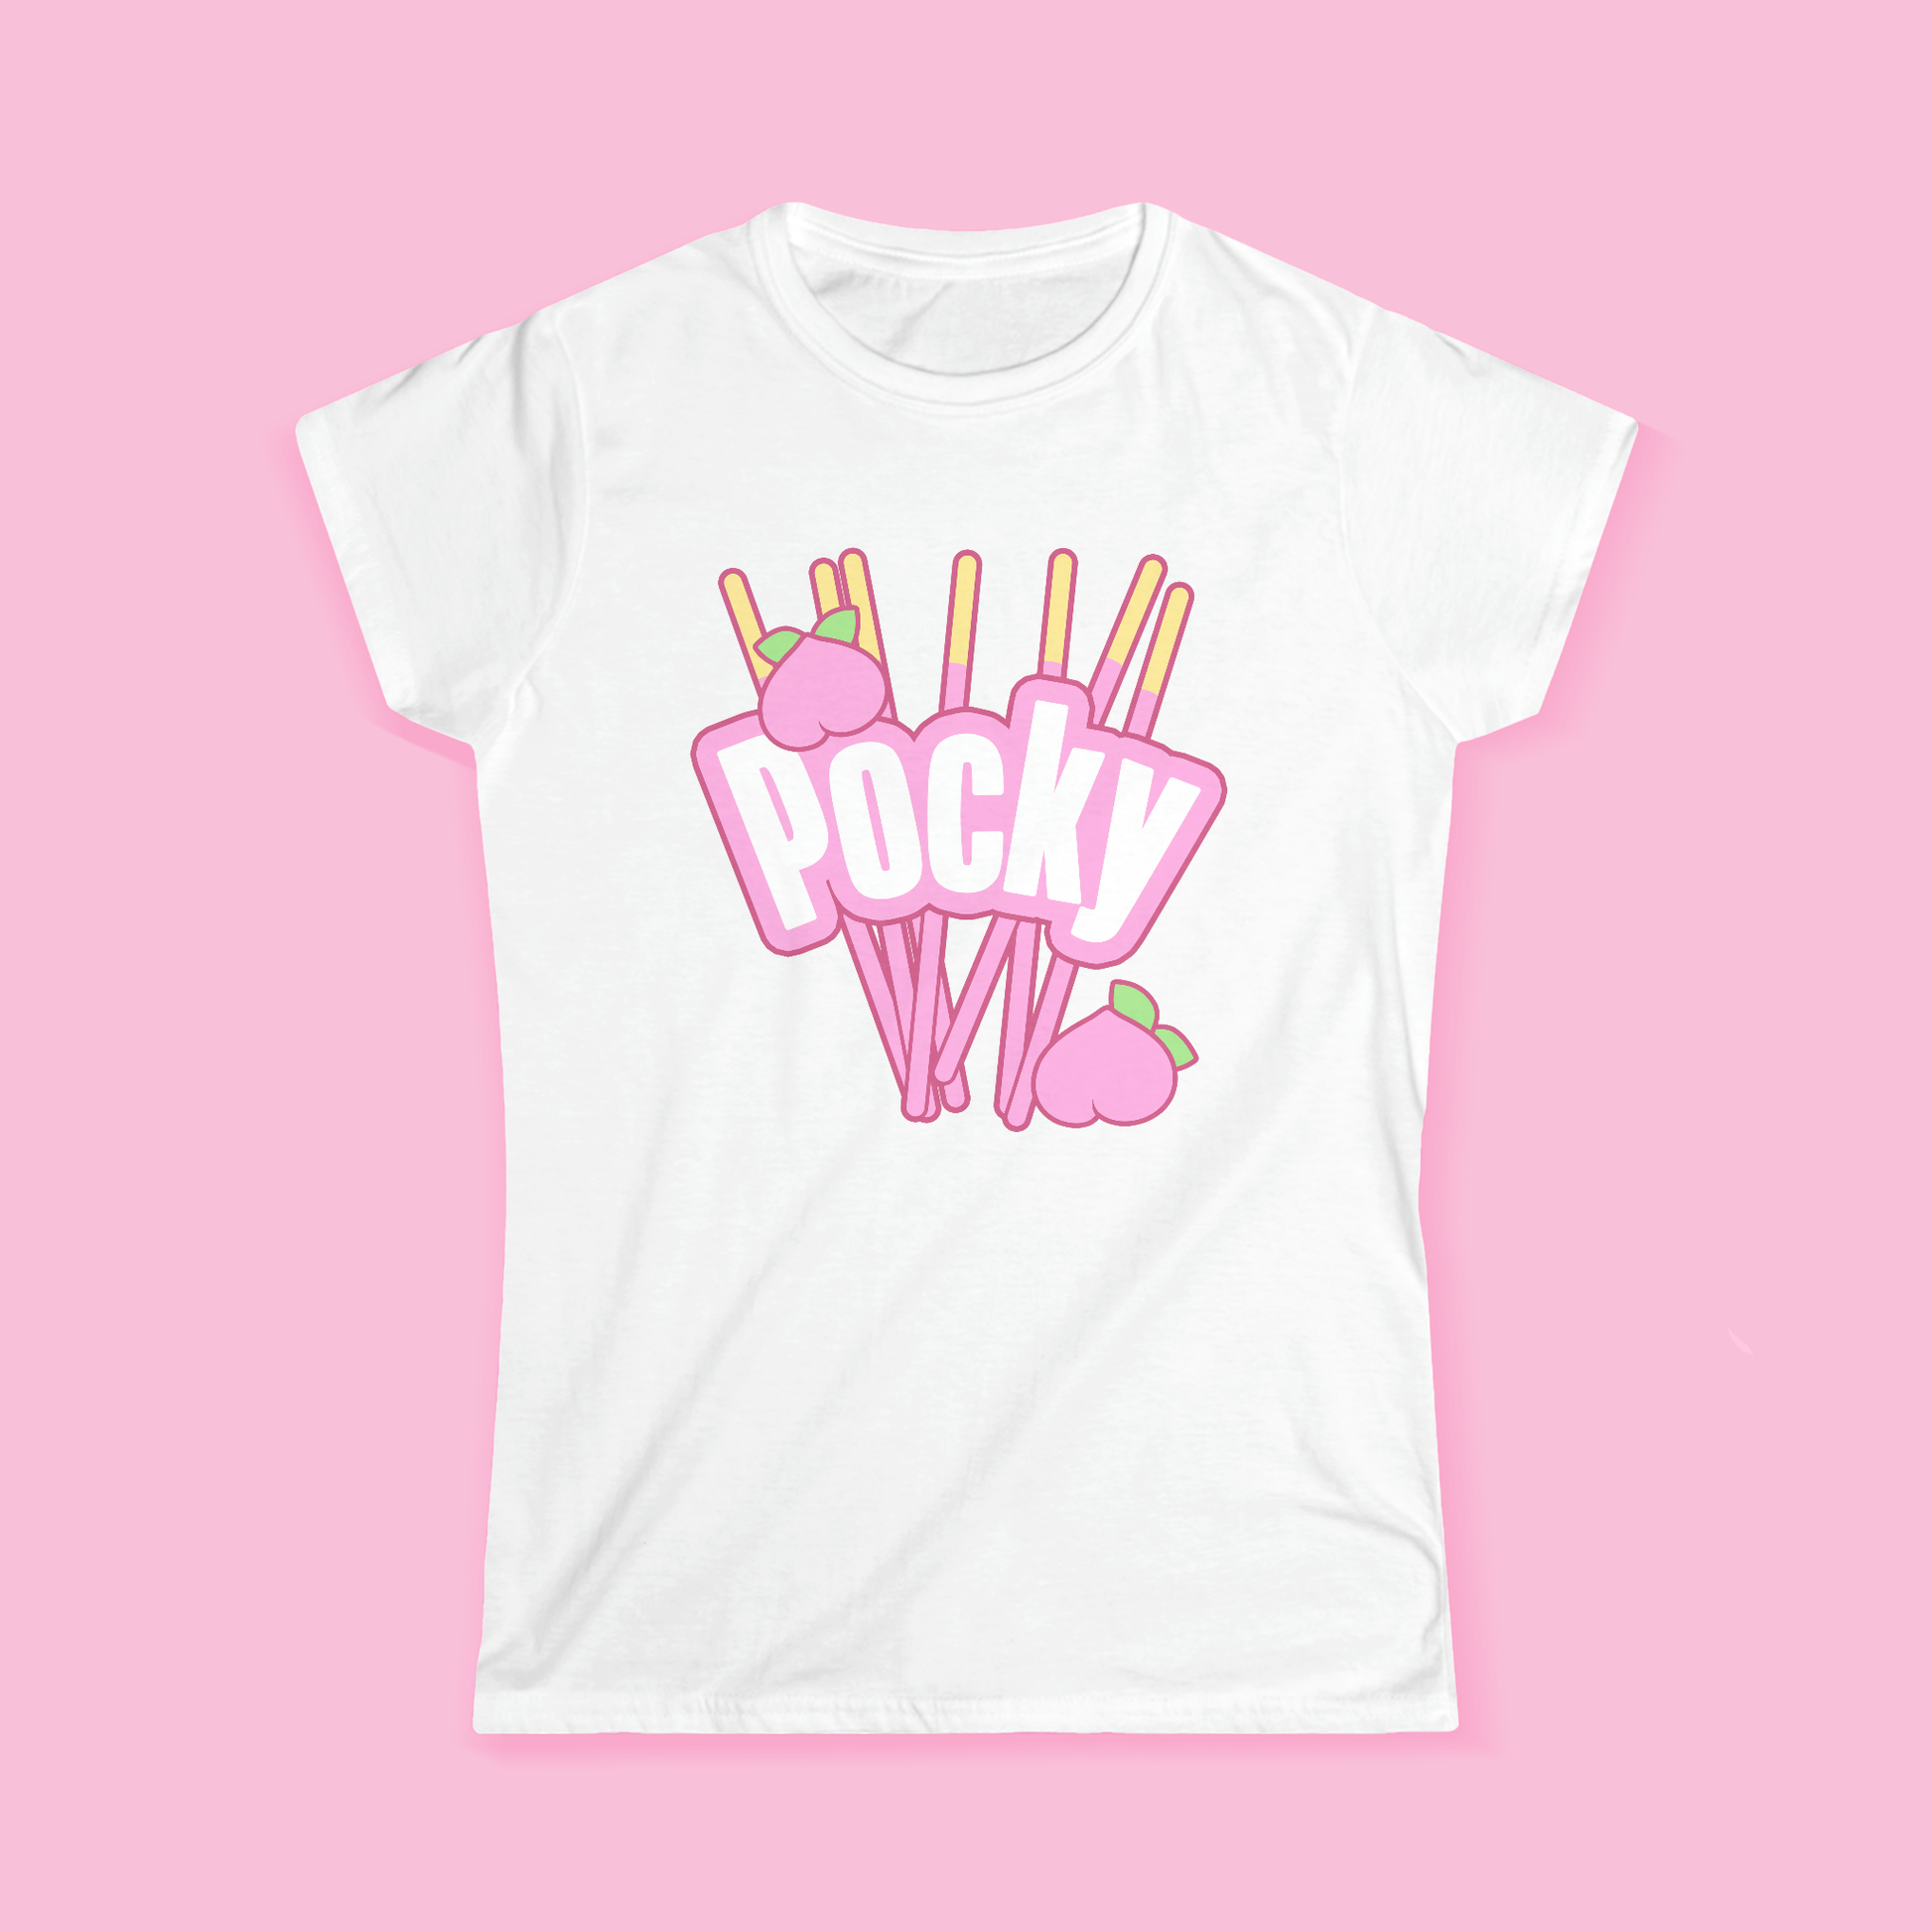 Pocky T-Shirt Pink Peach - Aesthetic Clothes for Women